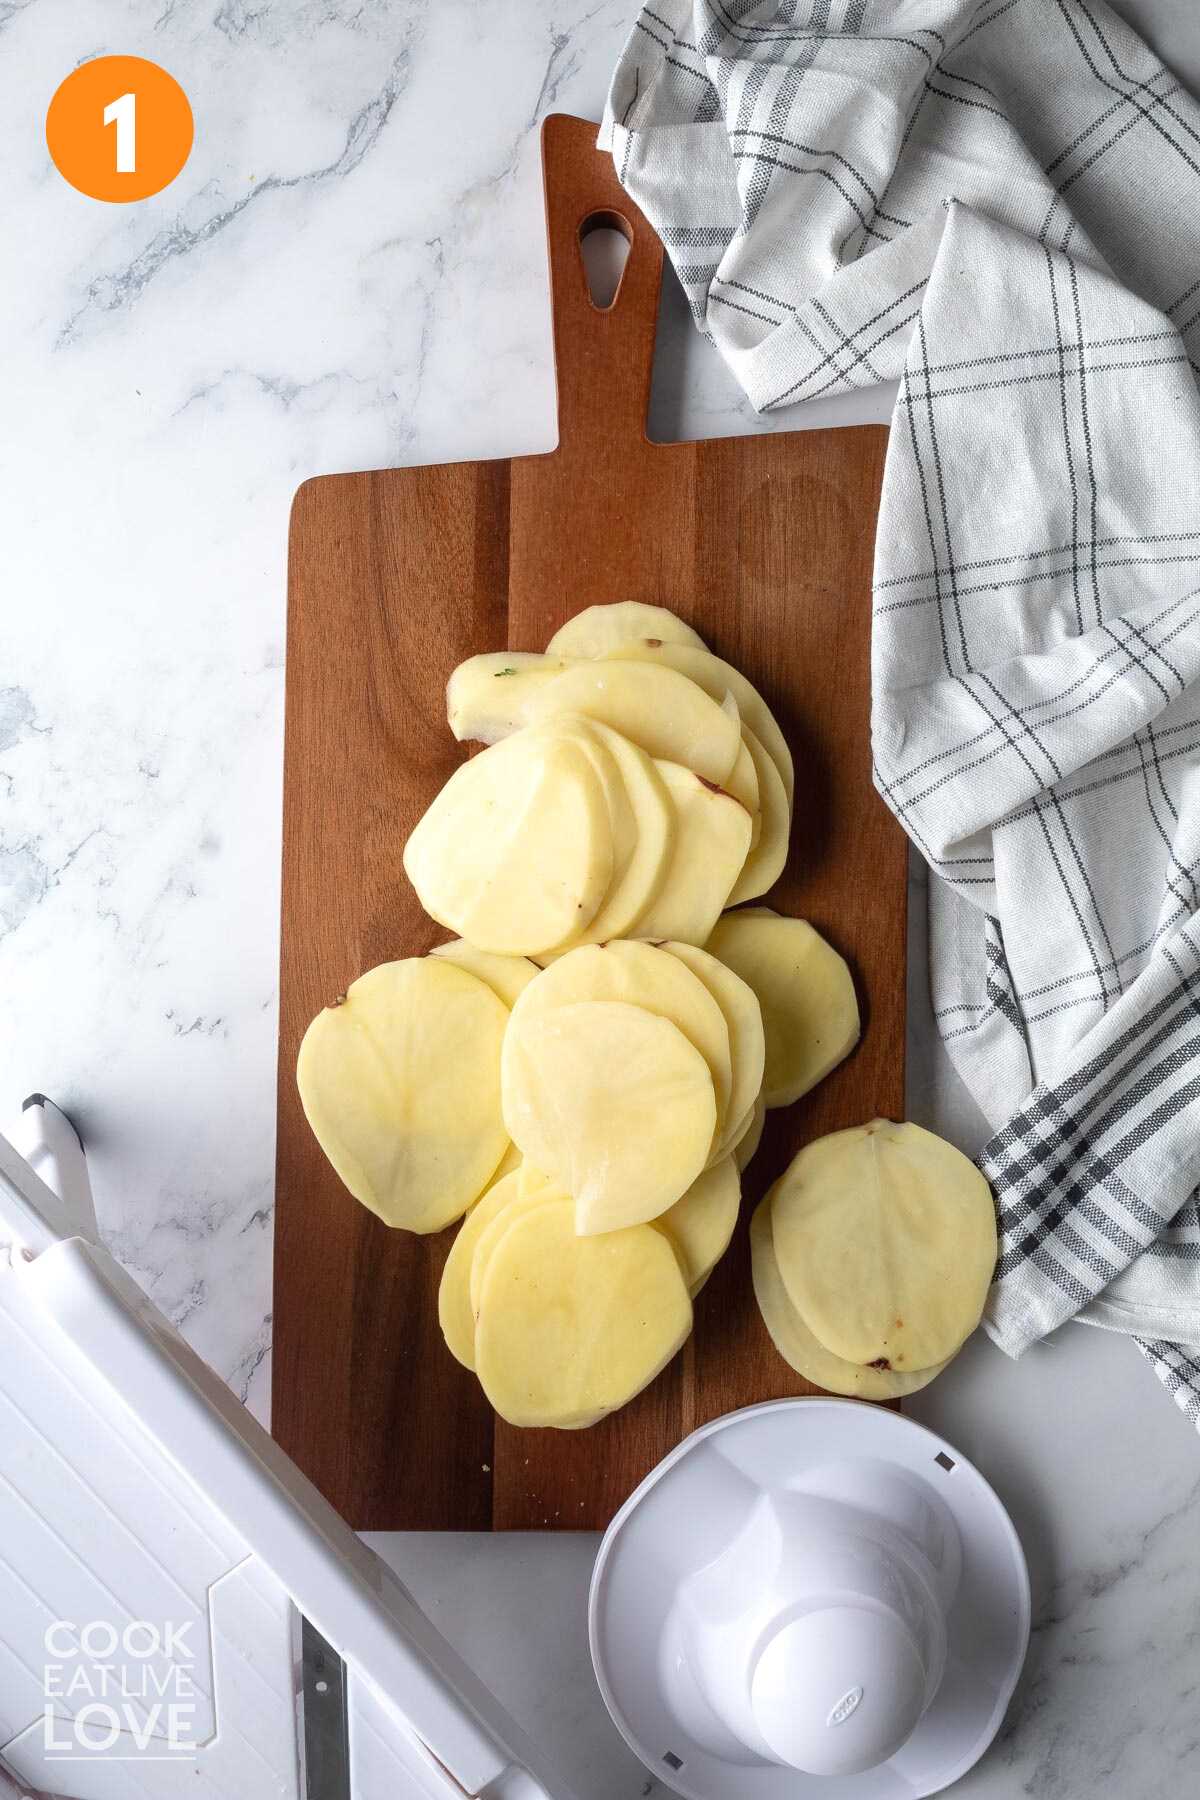 Sliced potatoes to make potato casserole on the table on a cutting board.